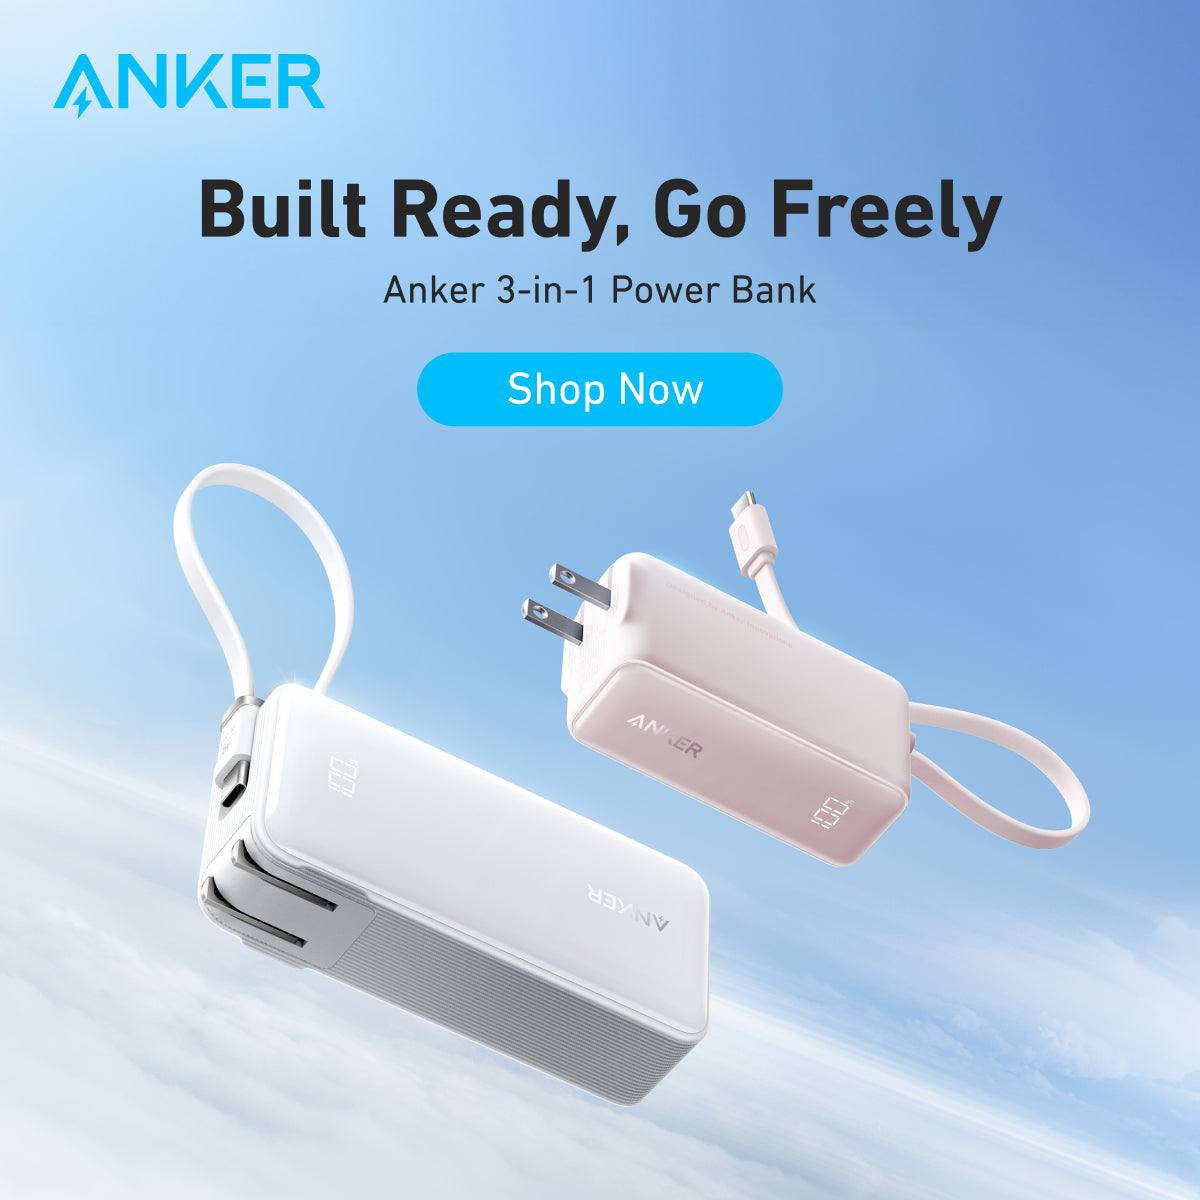 Anker Power Bank USB C Charger Block, 3-in-1 5,000mAh 10,000mAh Portable Charger with Built-in USB-C Cable and Foldable AC Plug, 30W Max Compact Battery Pack, for iPhone 15 Series, Galaxy, MacBook and More Purple-5000mAh